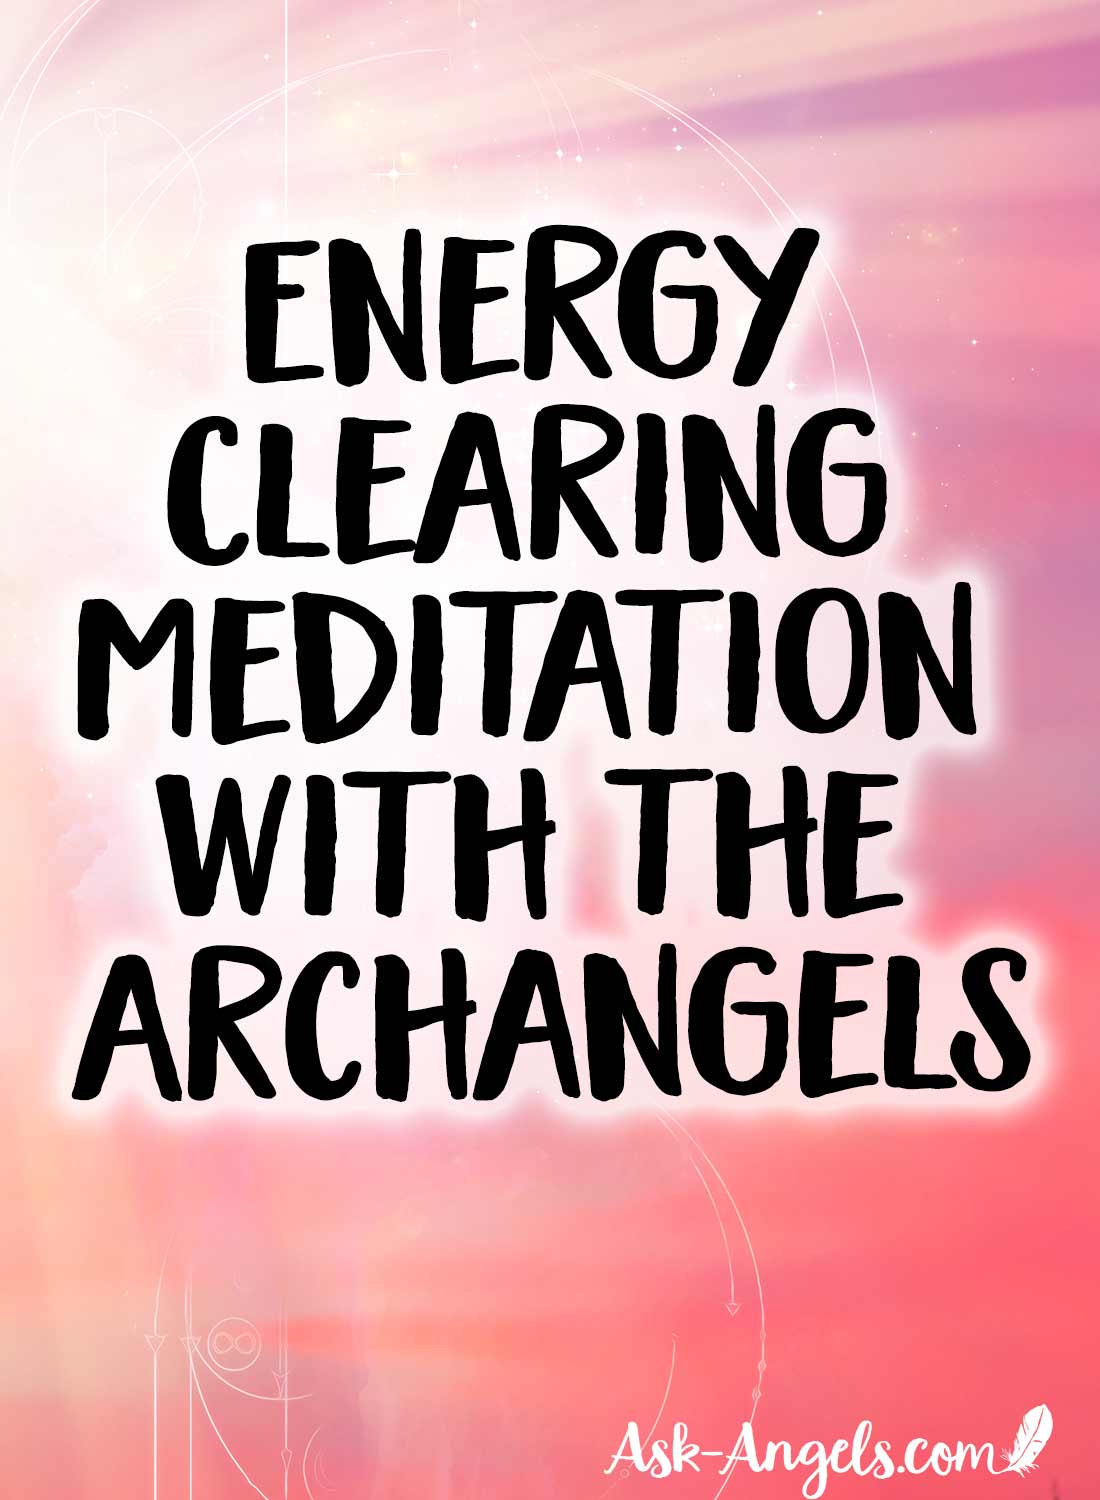 Energy Clearing Meditation with the Archangels